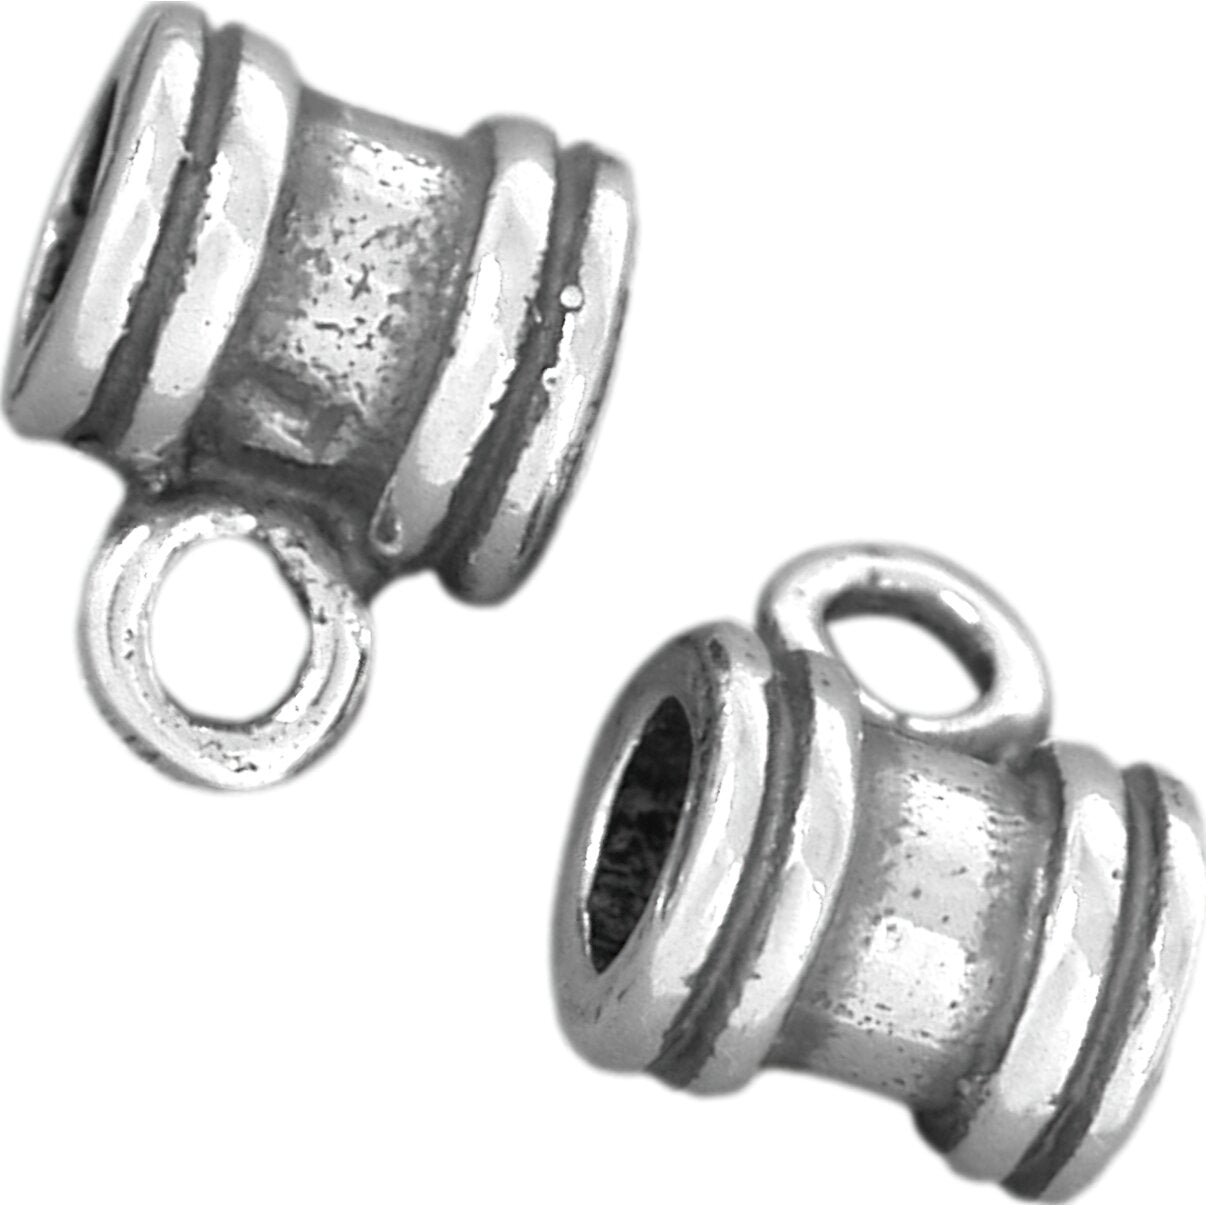 2 St. Silver Med Bali Tube Slider Jewelry Bail 3mm Hole